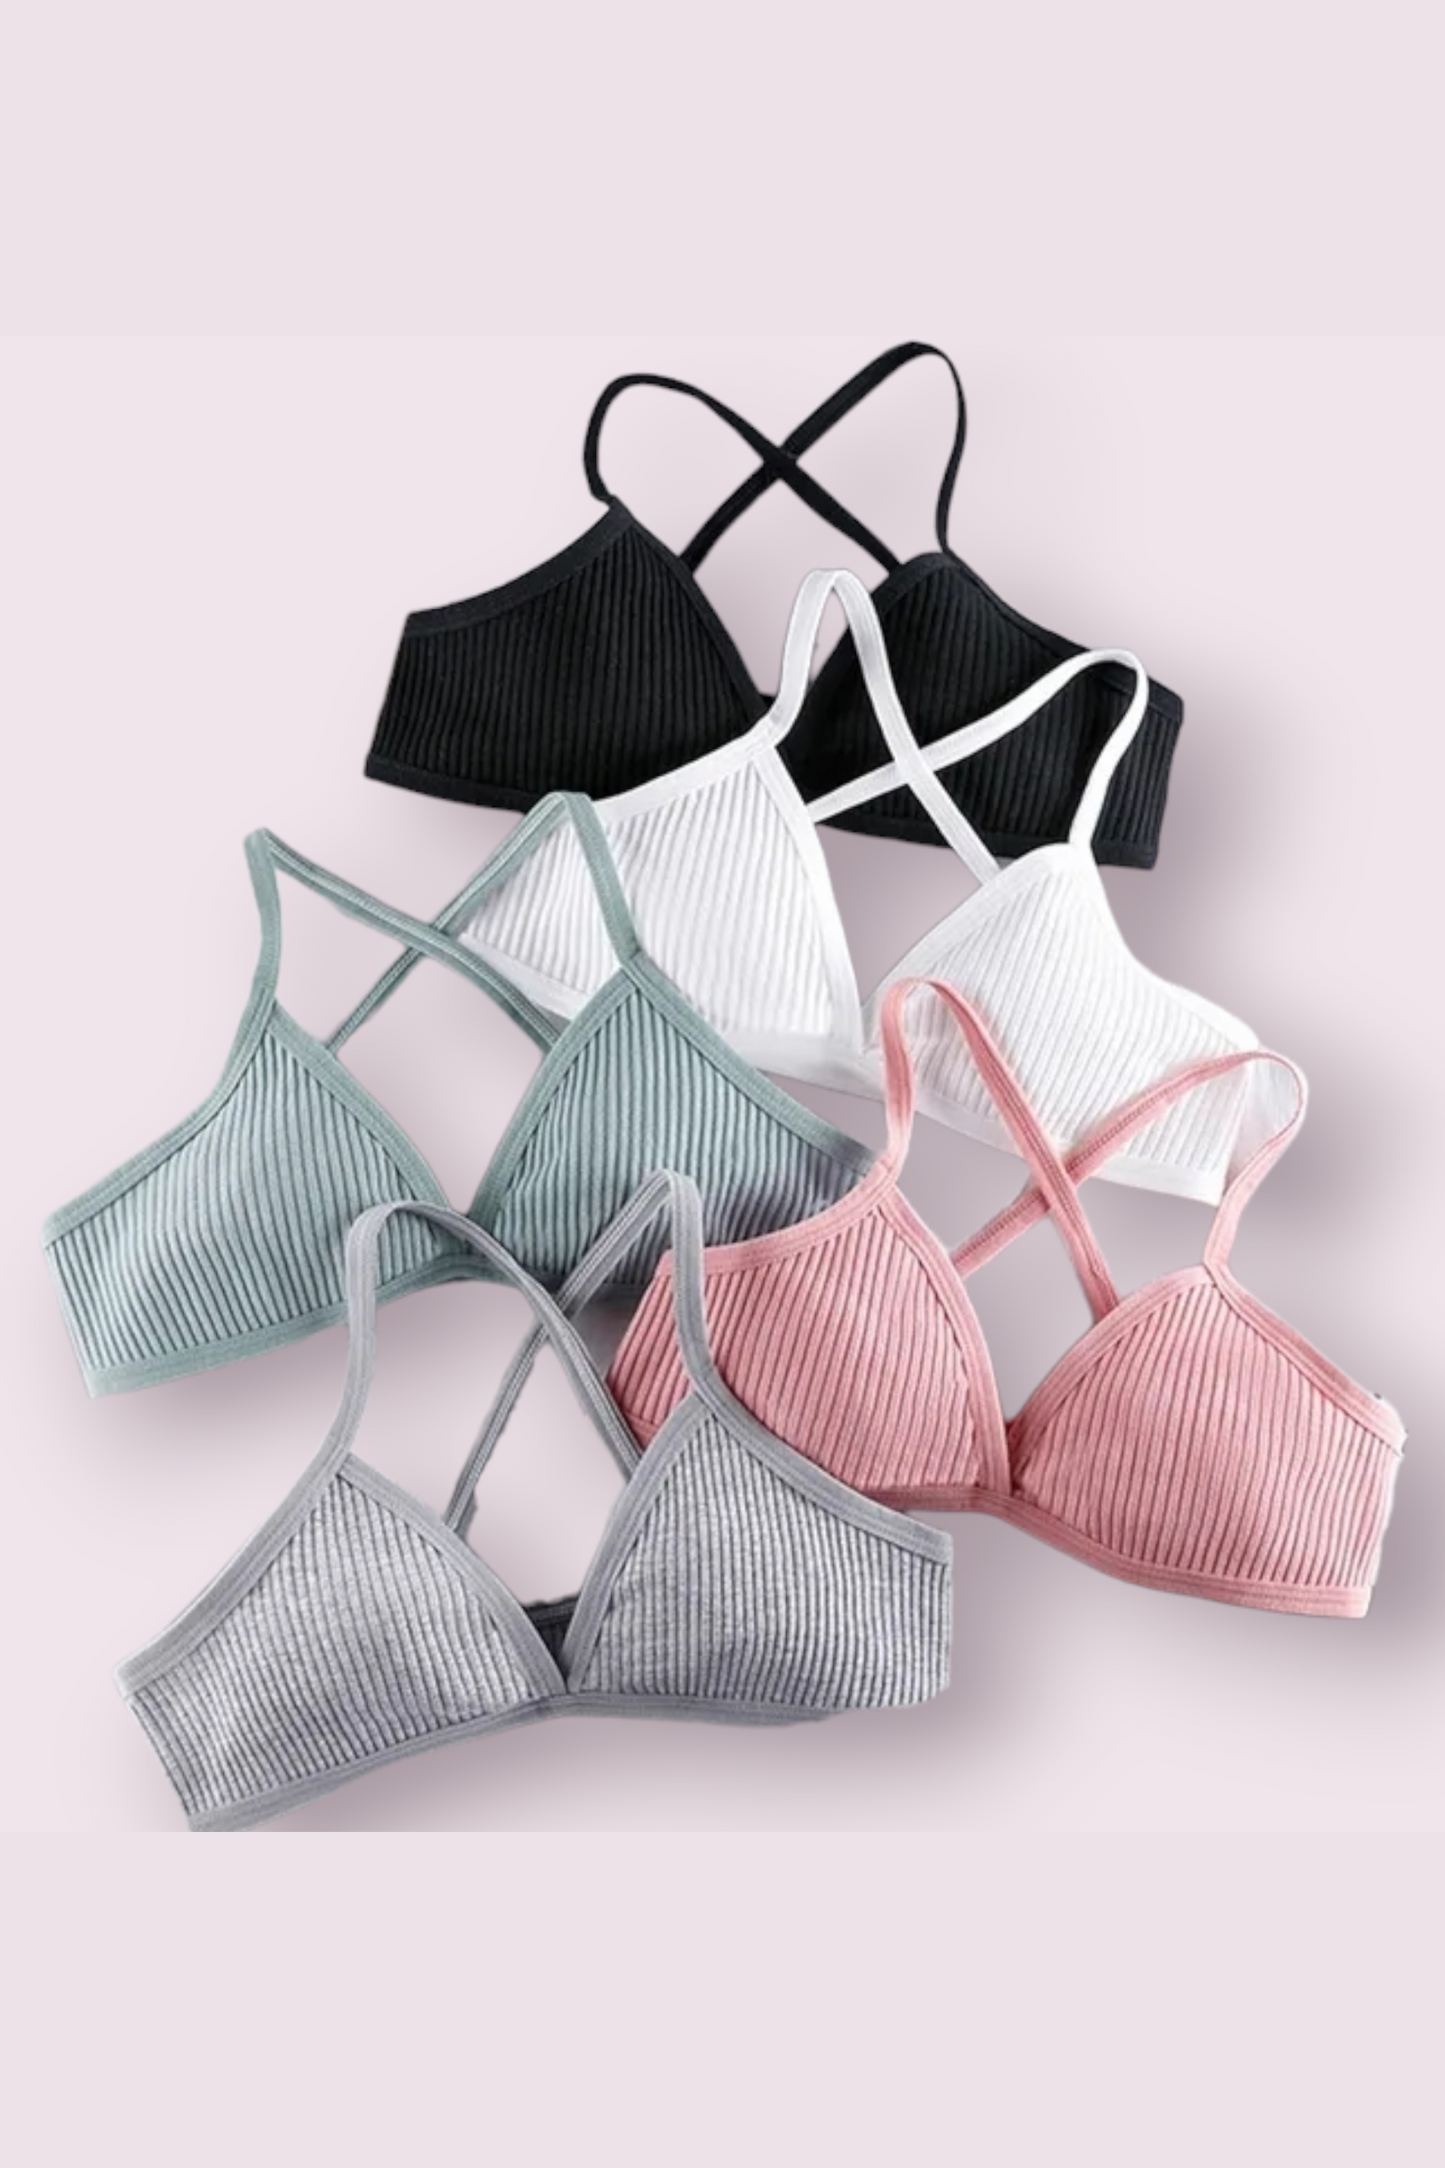 Zone Out Ribbed Bralette